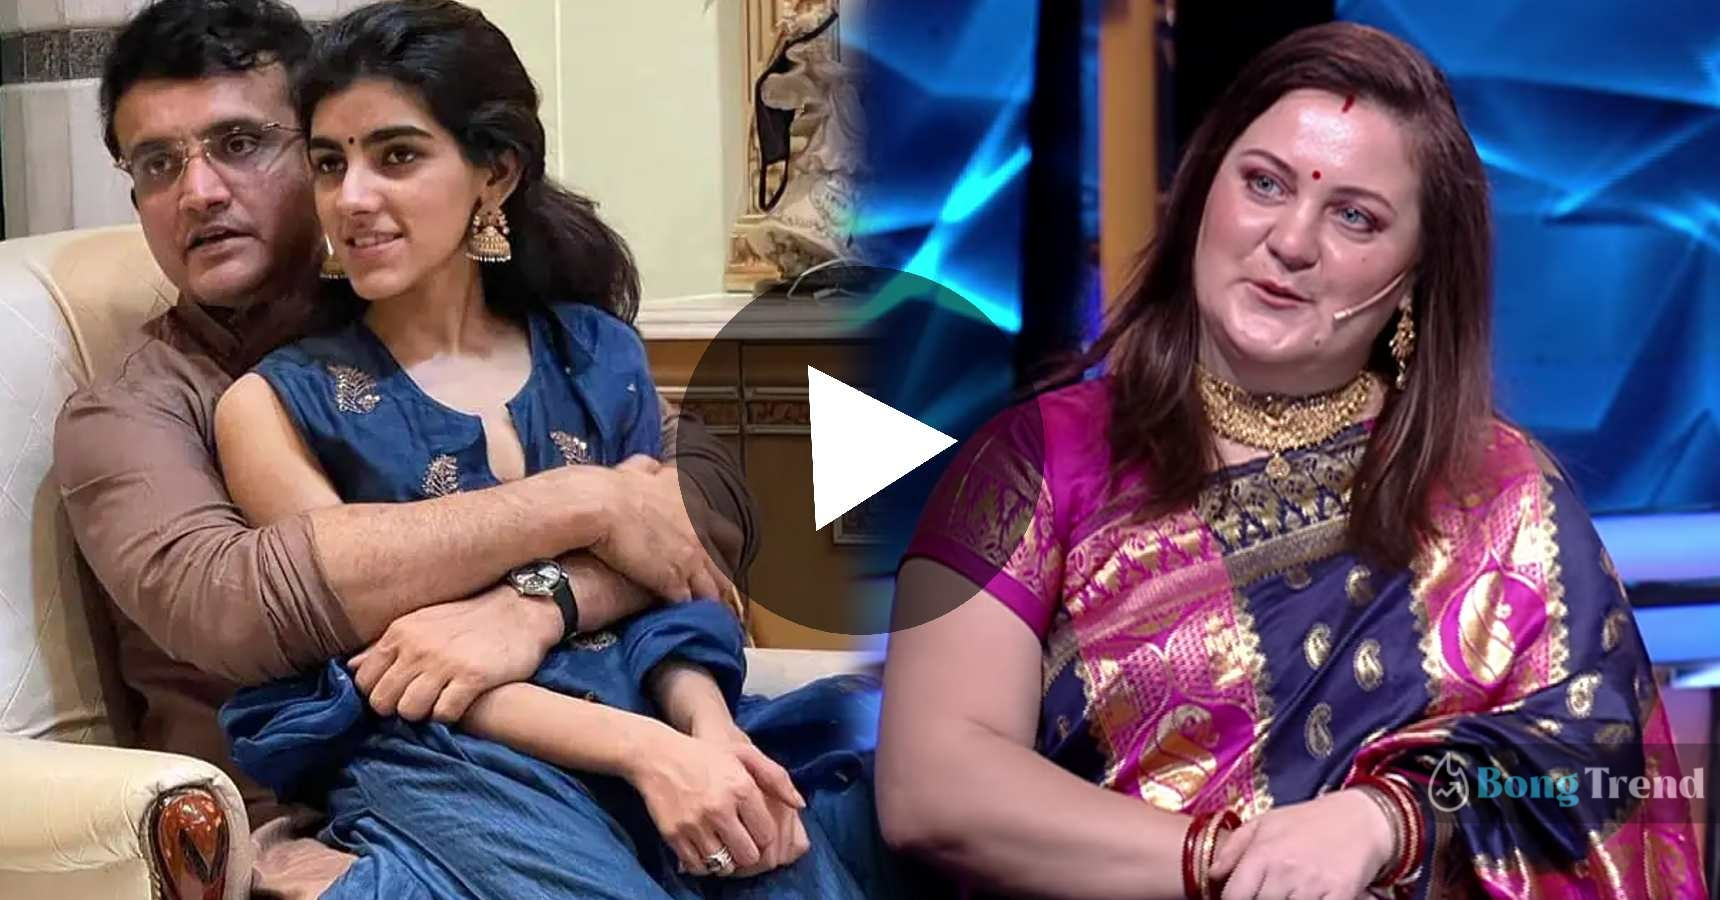 Russian Bengali woman asks sourav ganguly what if sana marries foreigner